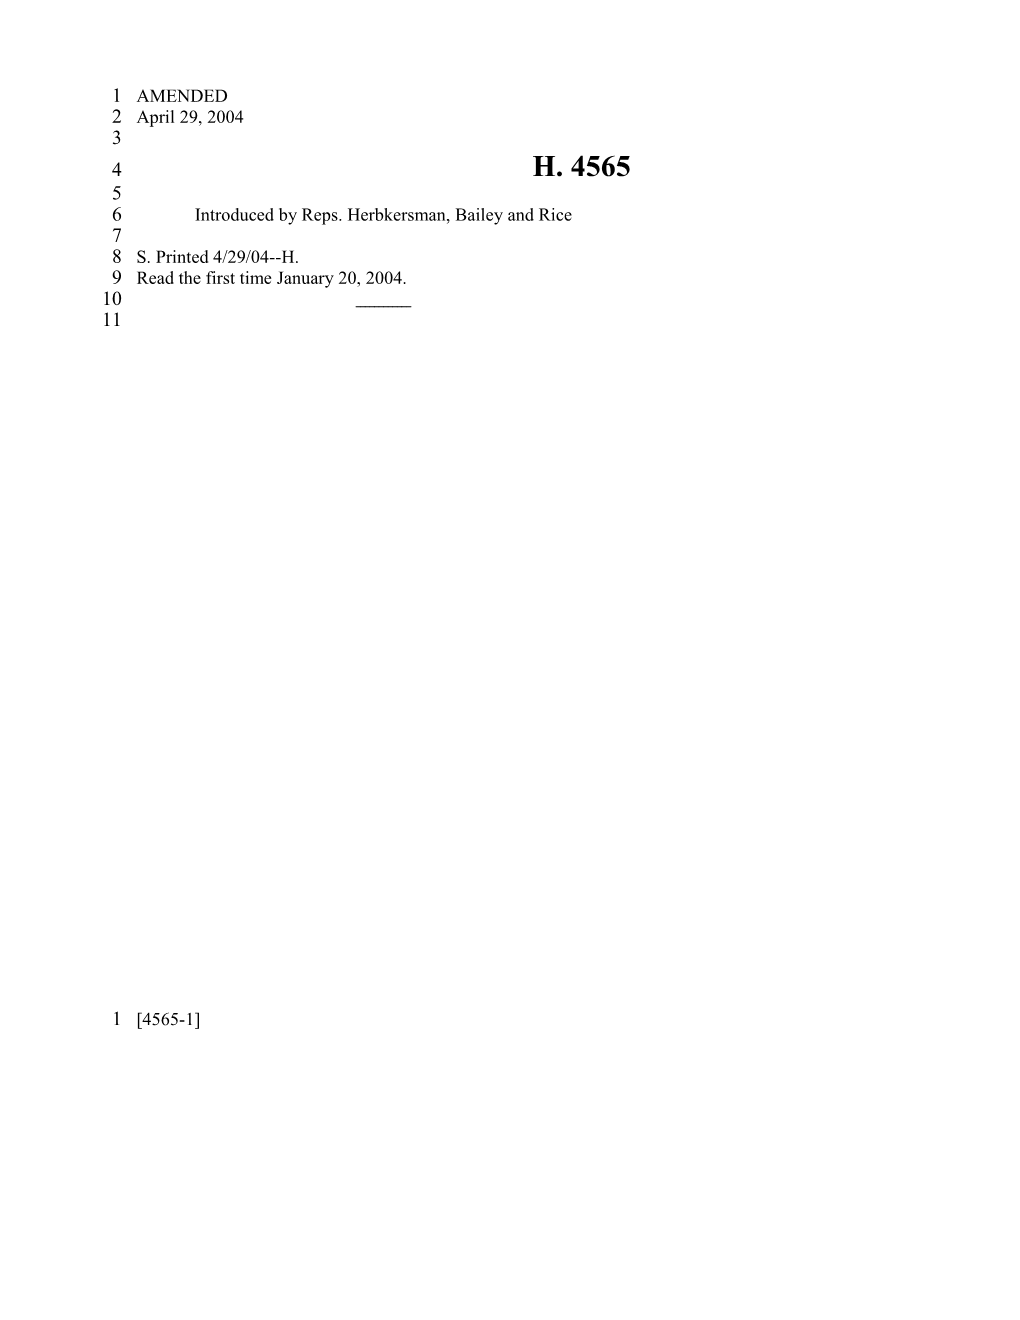 2003-2004 Bill 4565: Public-Private Education Facilities and Infrastructure Act - South